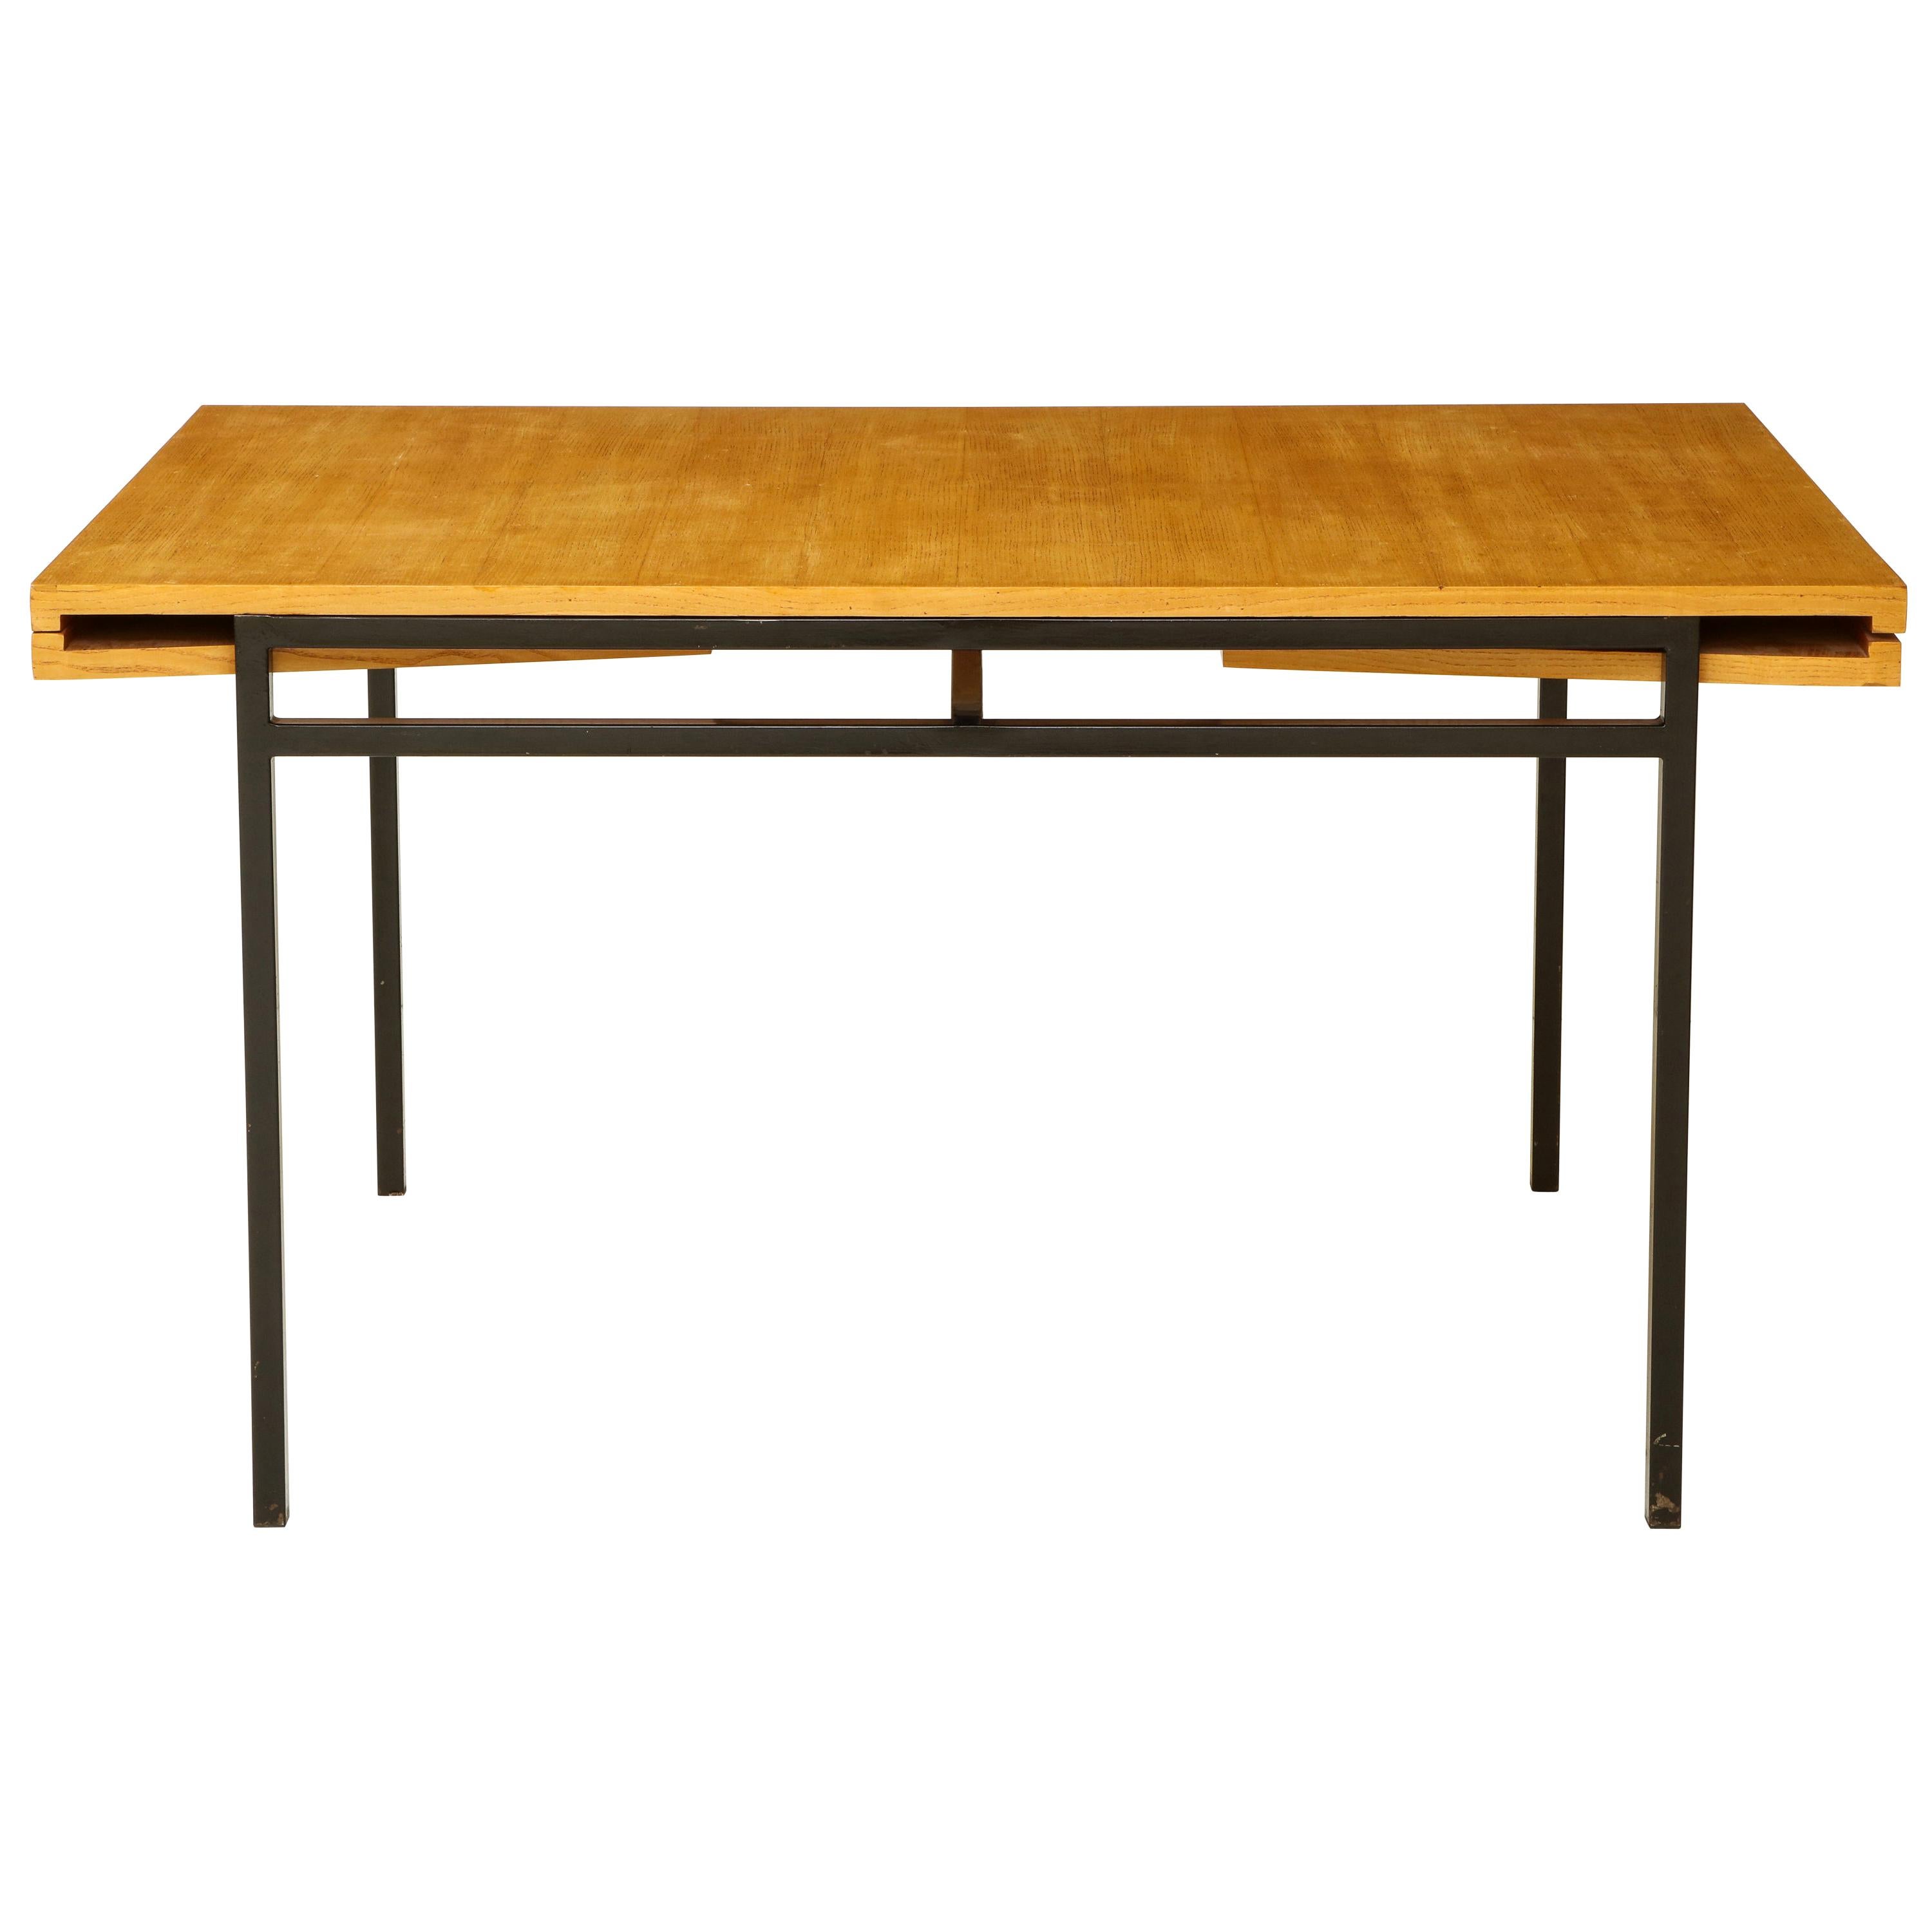 Rare Expandable Dining Room Table by Pierre Guariche and Arp, France, 1960s For Sale